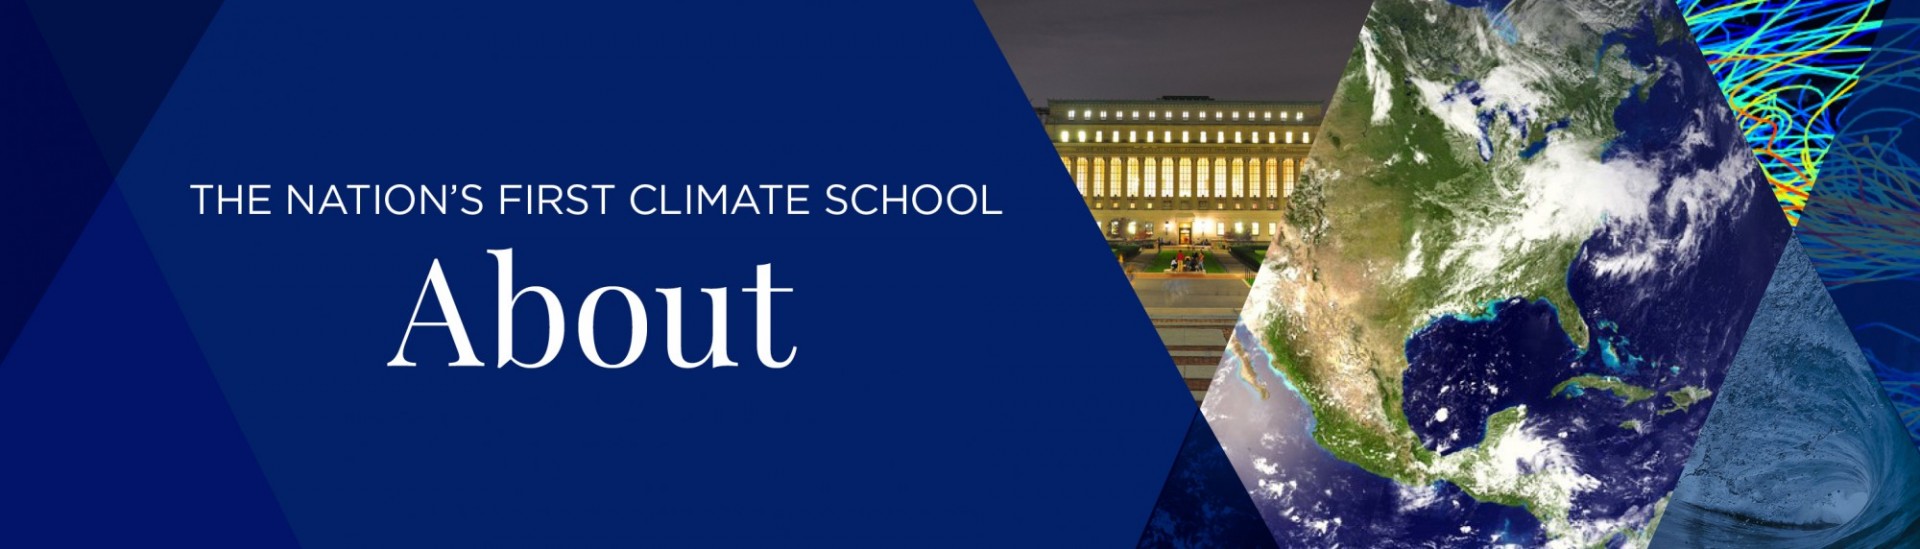 About the Nation's First Climate School banner with collage of climate-related images